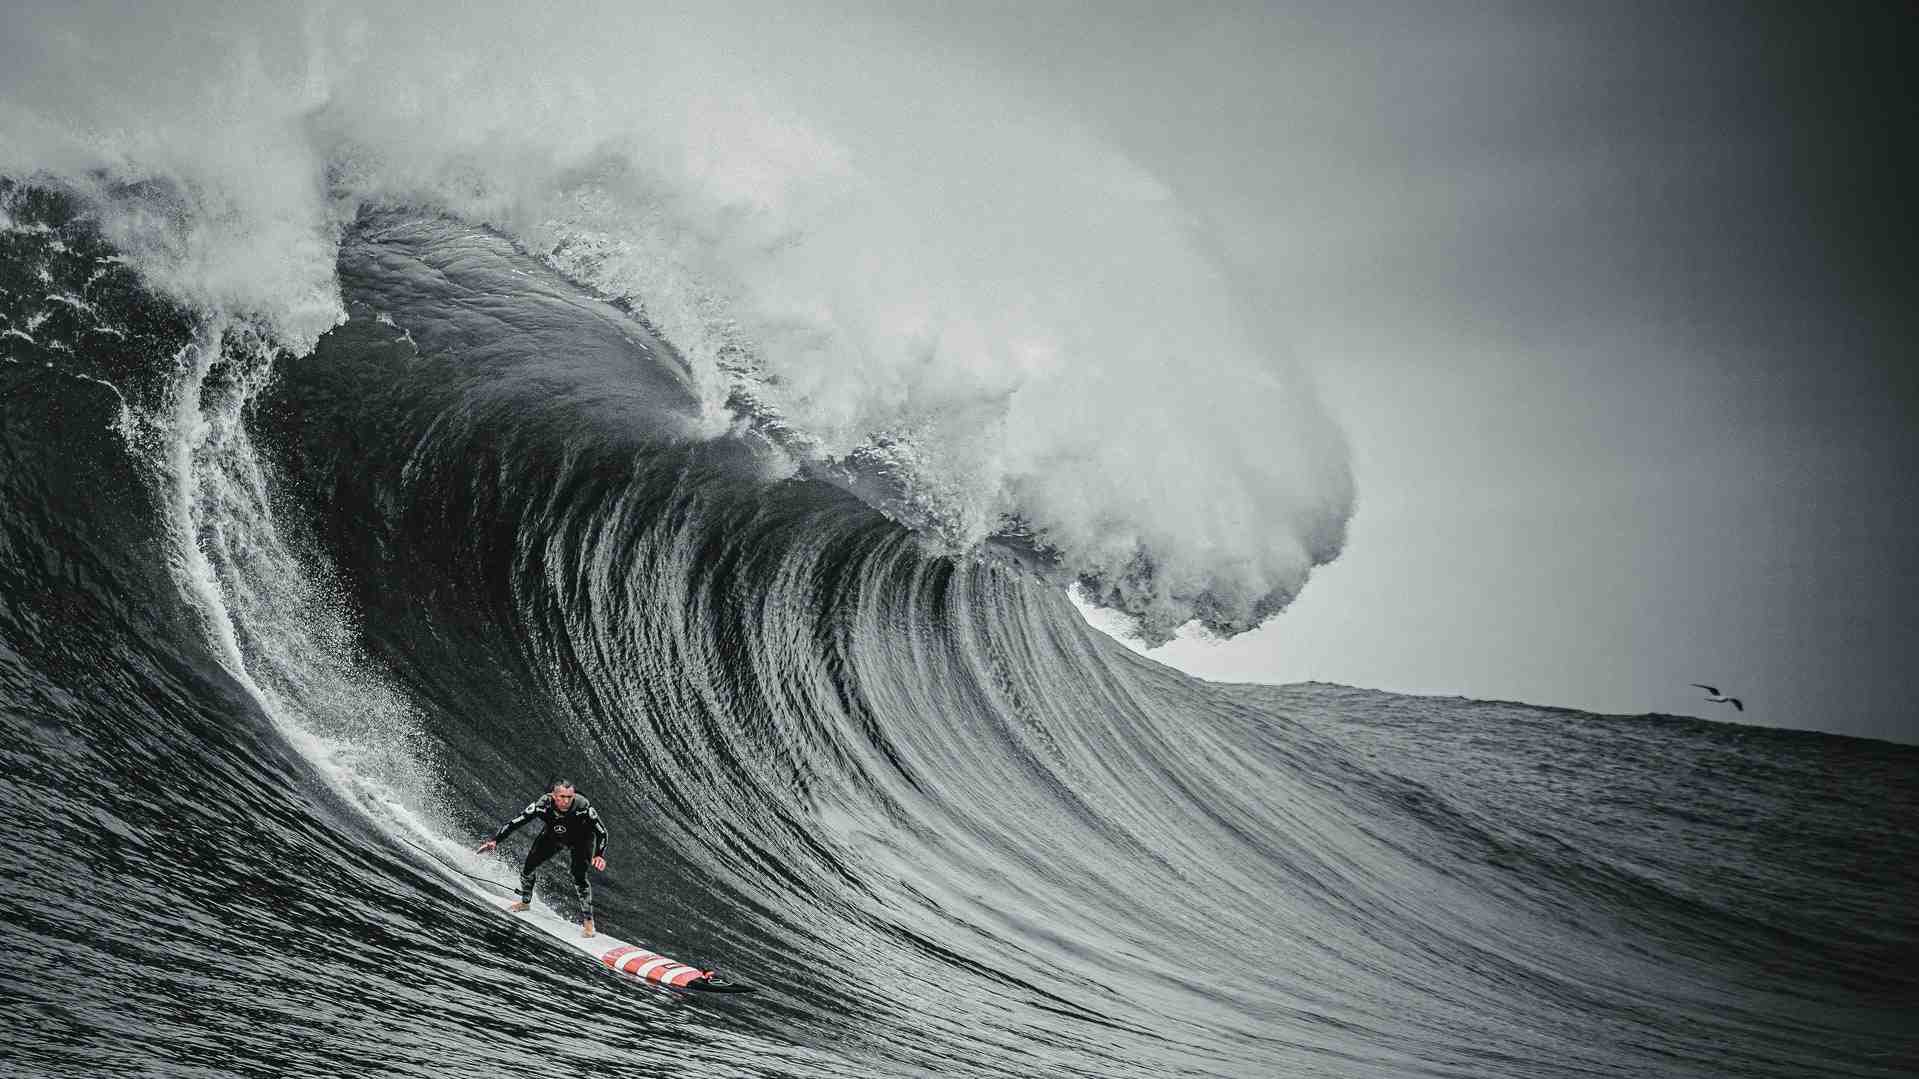 How fast do surfers go on big waves?